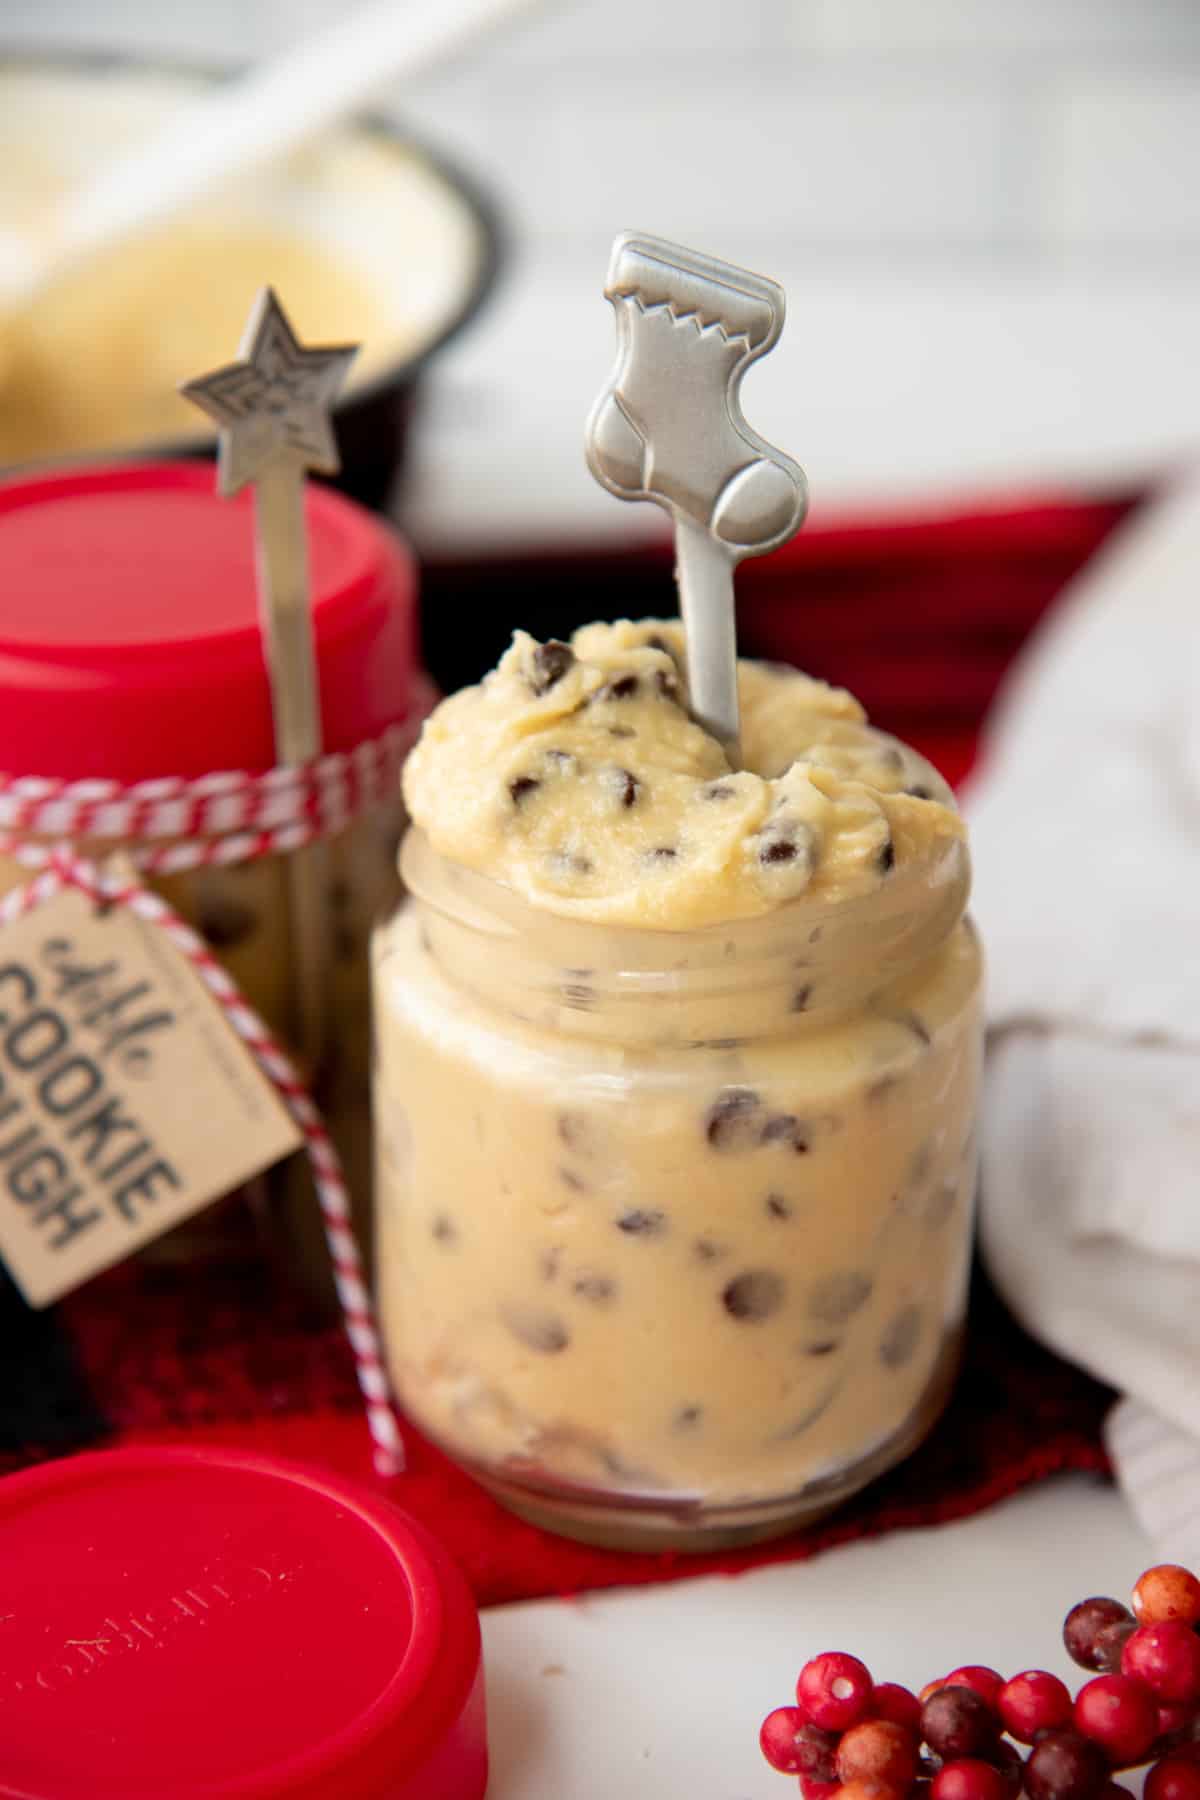 An open jar of eggless cookie dough with a silver holiday spoon in it sits in front of a packaged jar of the dough.